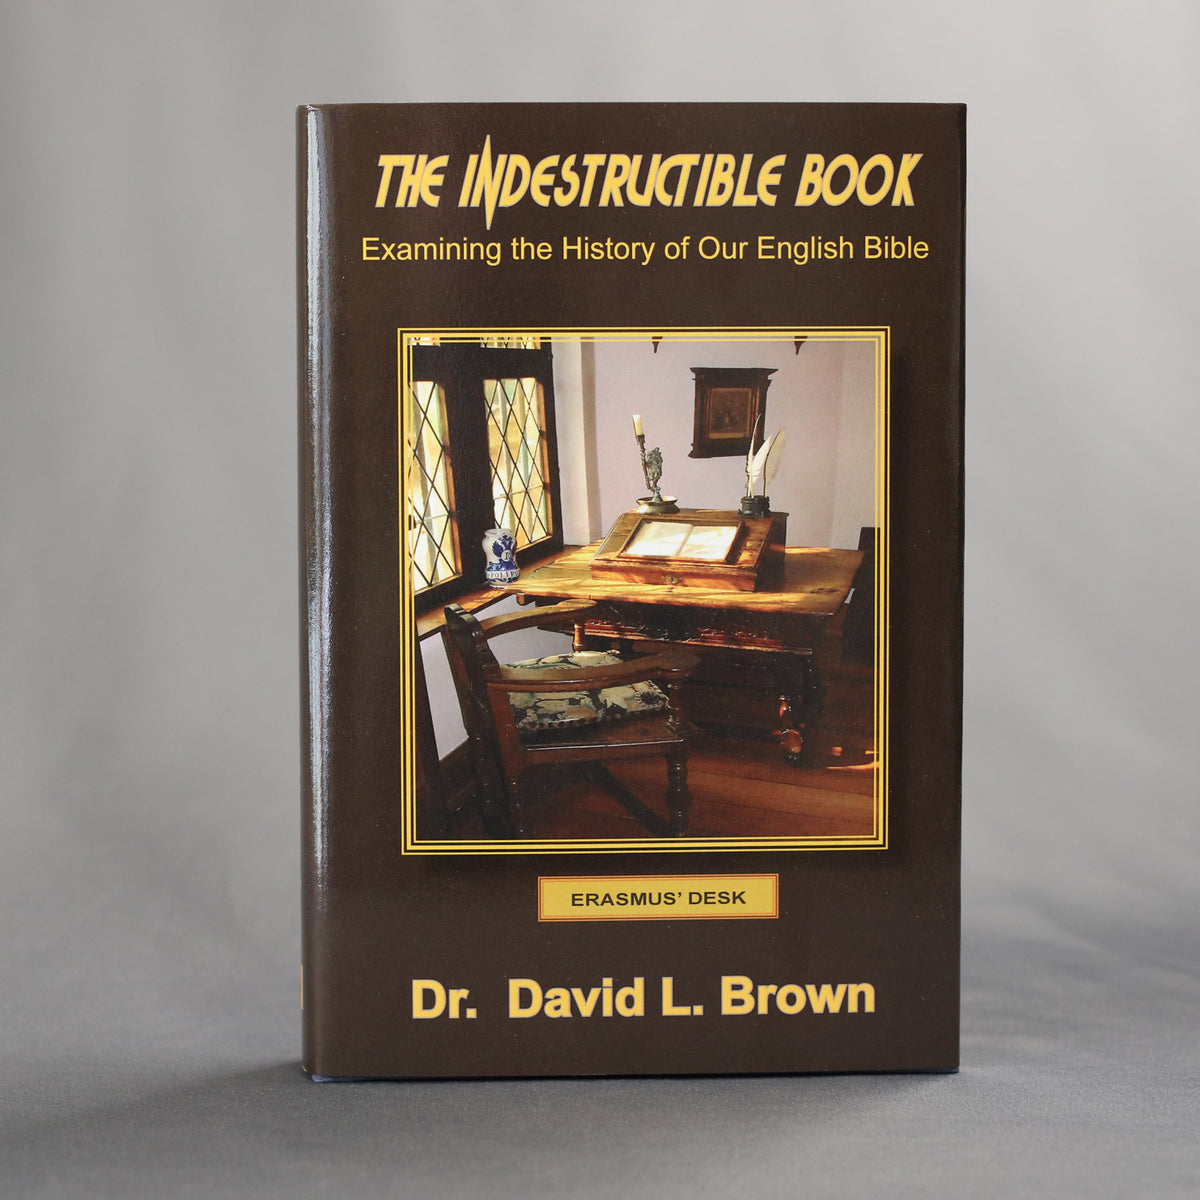 The Indestructible Book: Examining the History of Our English Bible (Brown)